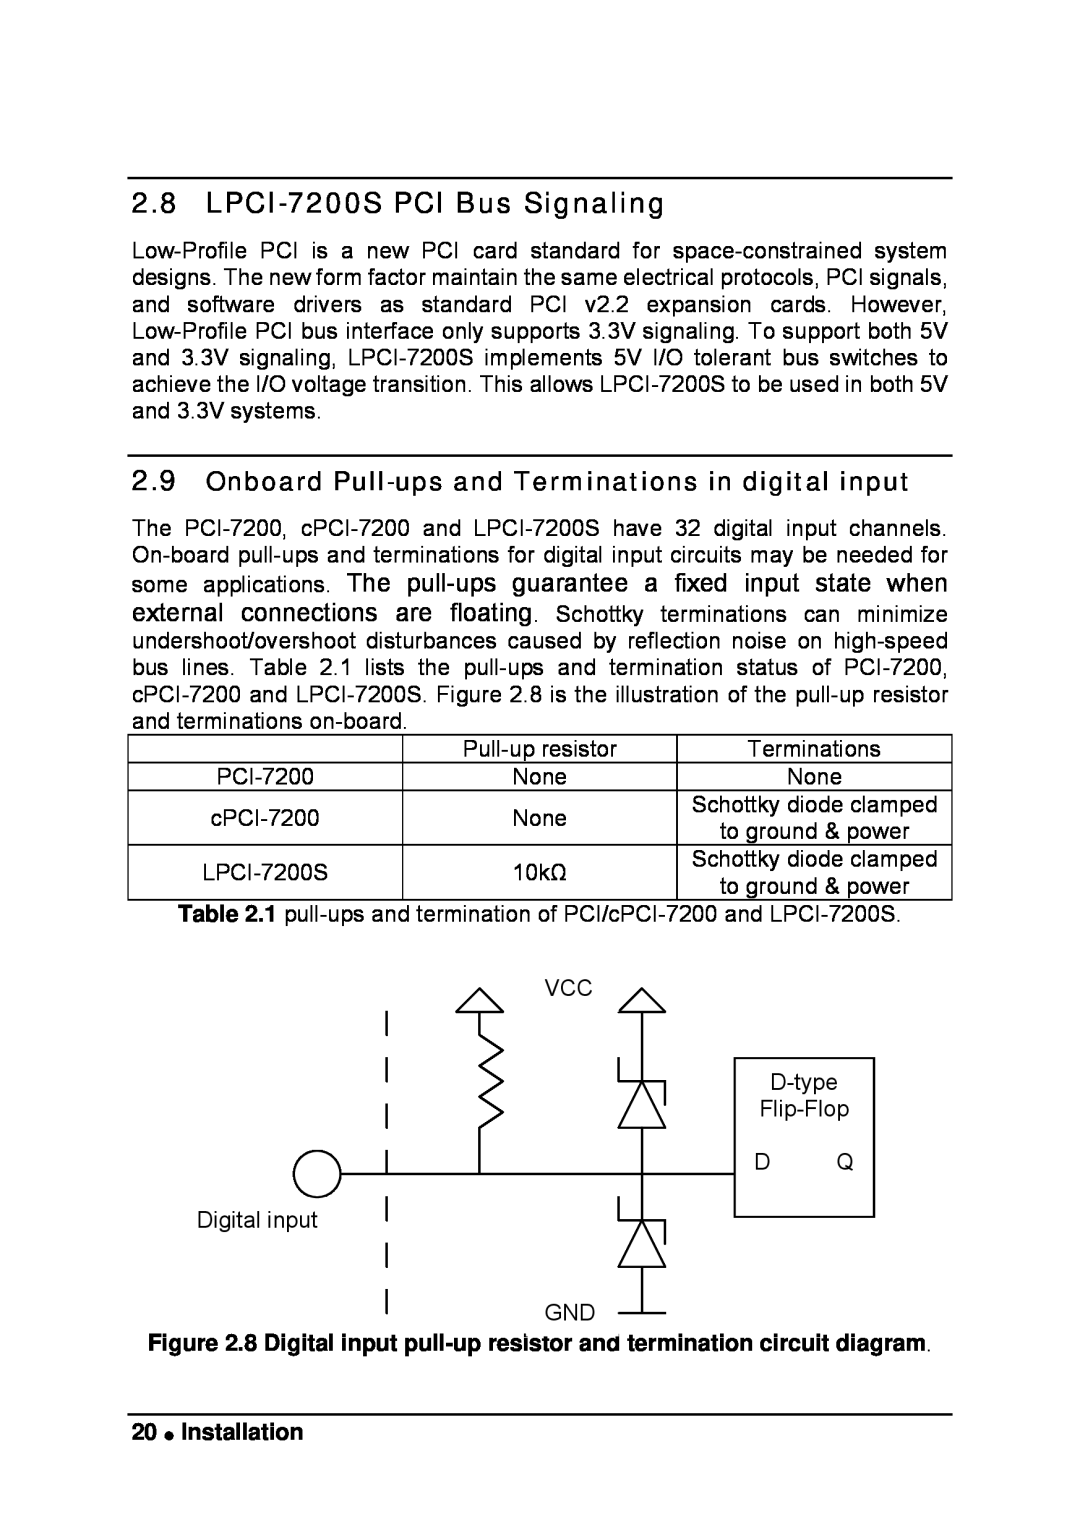 Intel manual LPCI-7200S PCI Bus Signaling, Onboard Pull-ups and Terminations in digital input, Installation 